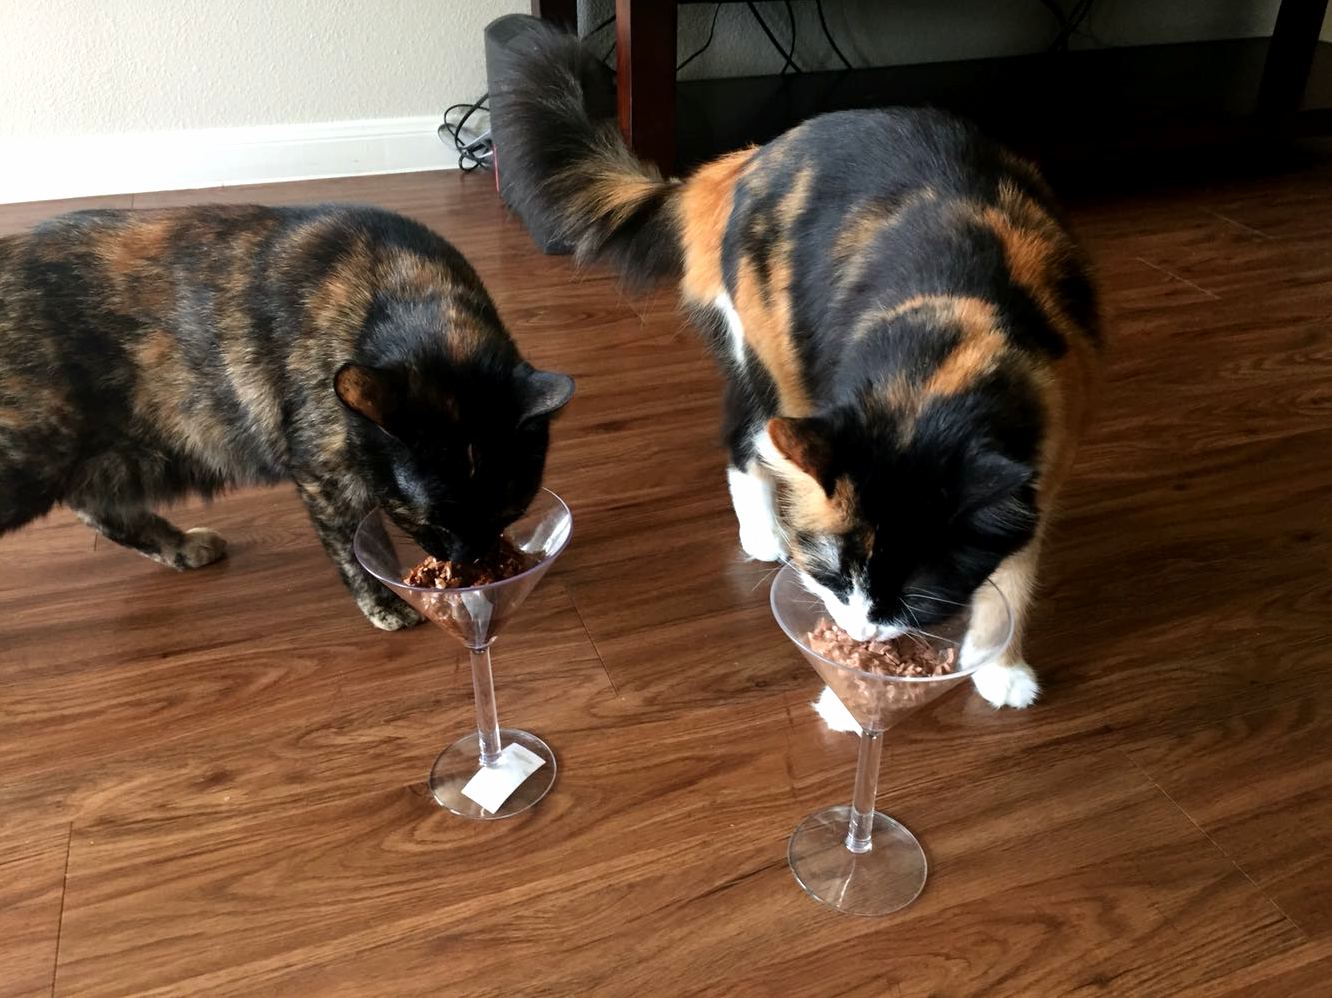 Our cats are real life fancy feast models plastic martini glasses included